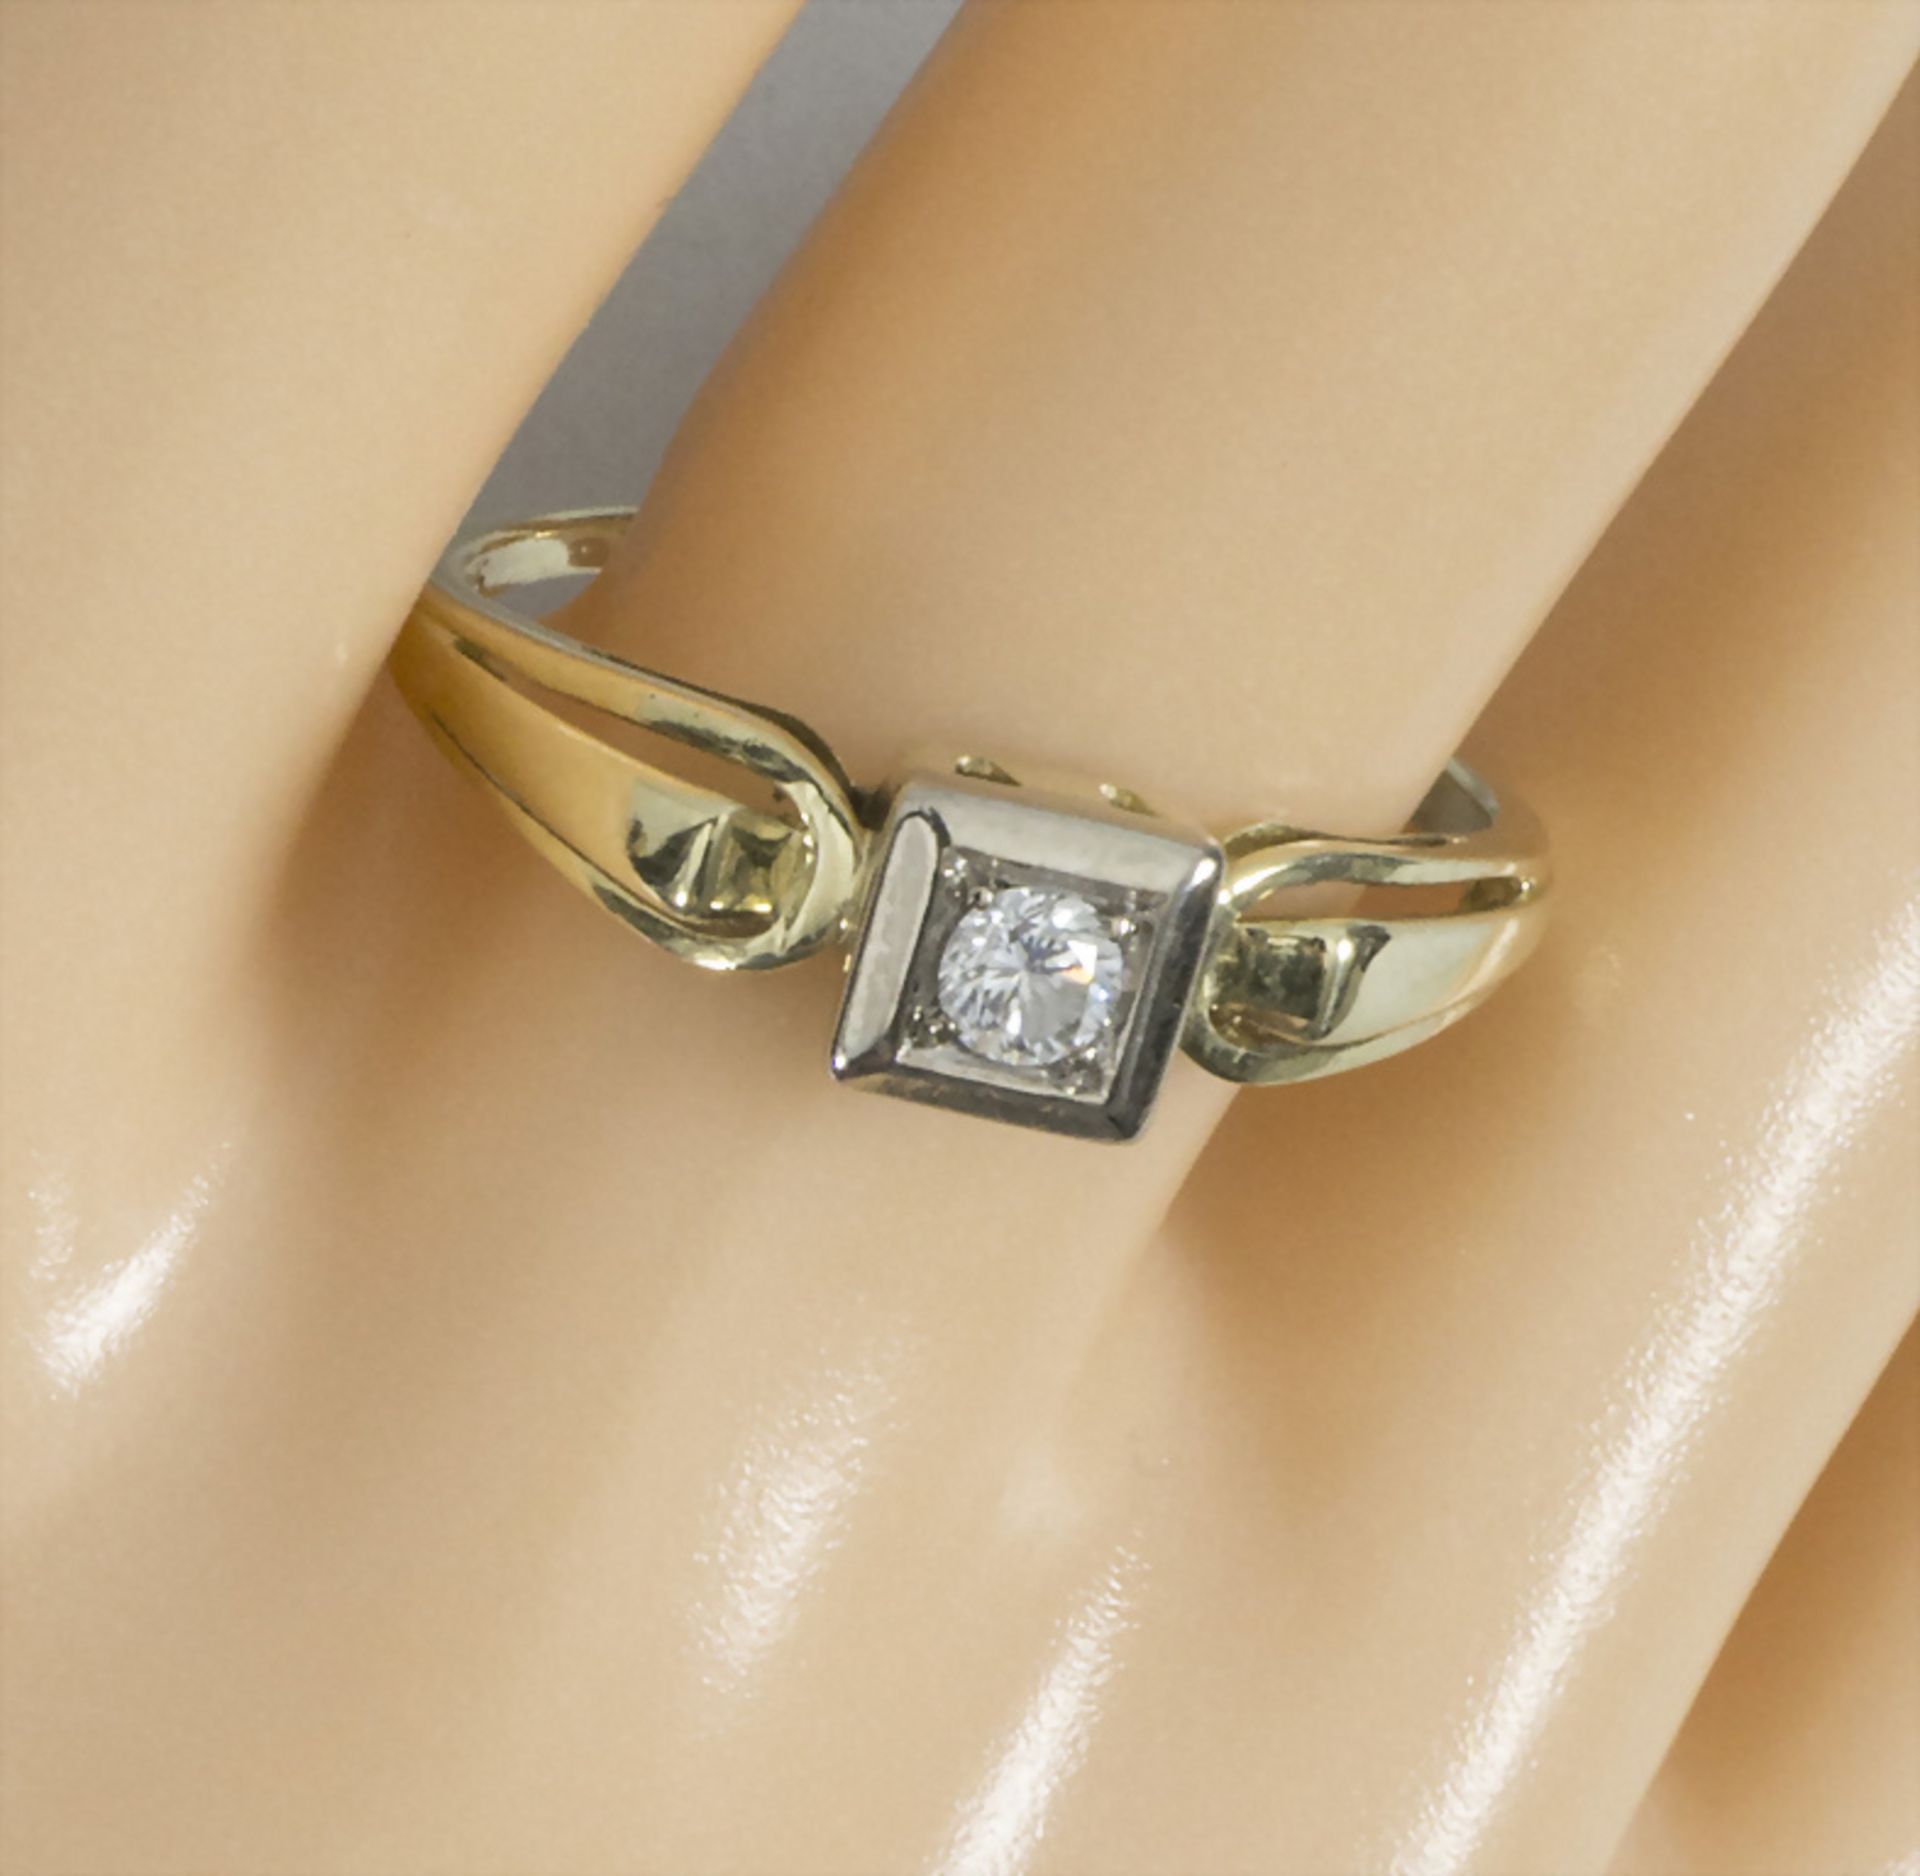 Brillant Solitärring / A 14k gold ring with a brilliant solitaire - Image 5 of 5